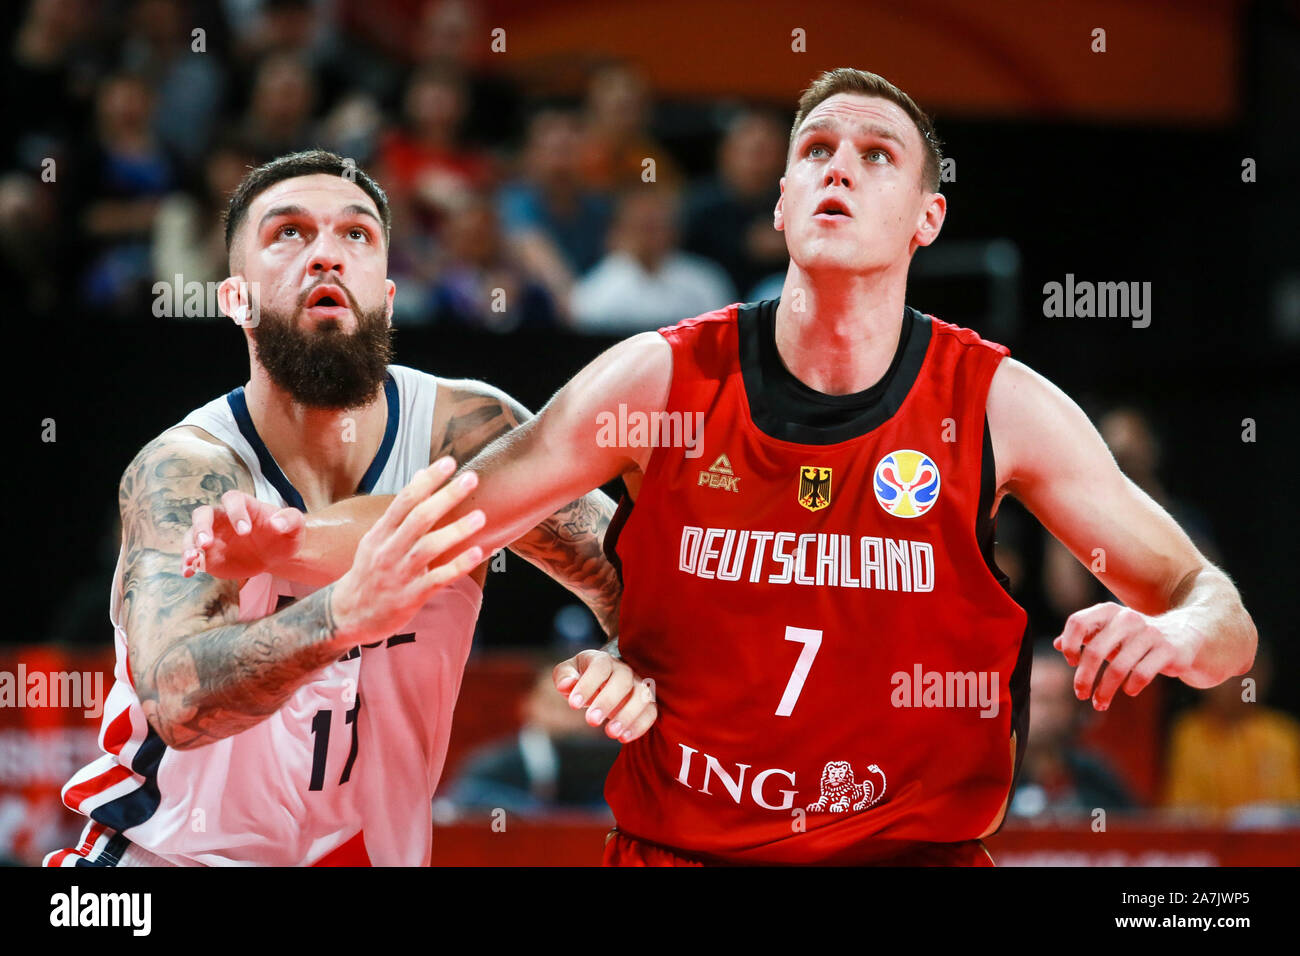 Johannes Voigtmann, right, of Germany national basketball team challenges  Vincent Poirier of France national basketball team in the first found match  Stock Photo - Alamy